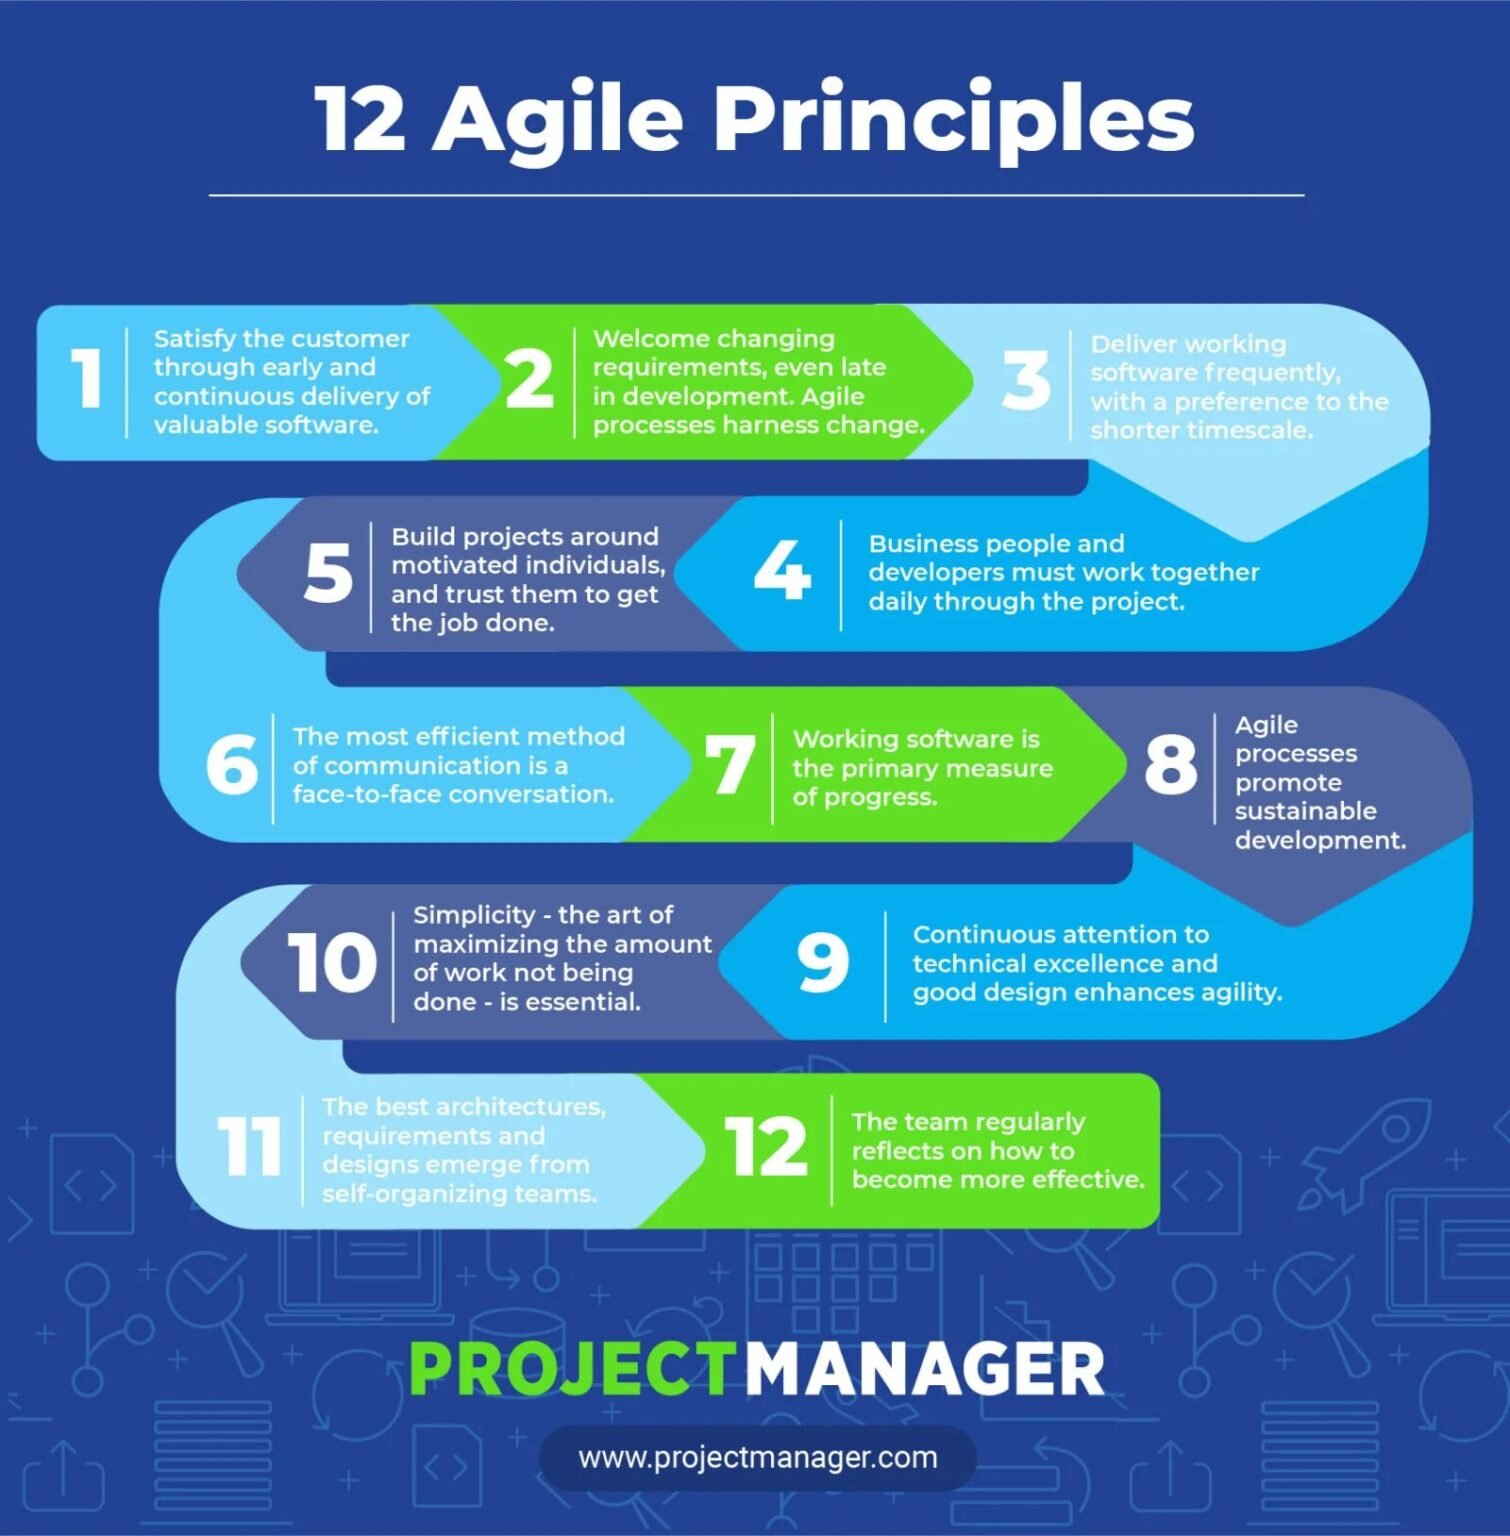 case study on agile projects